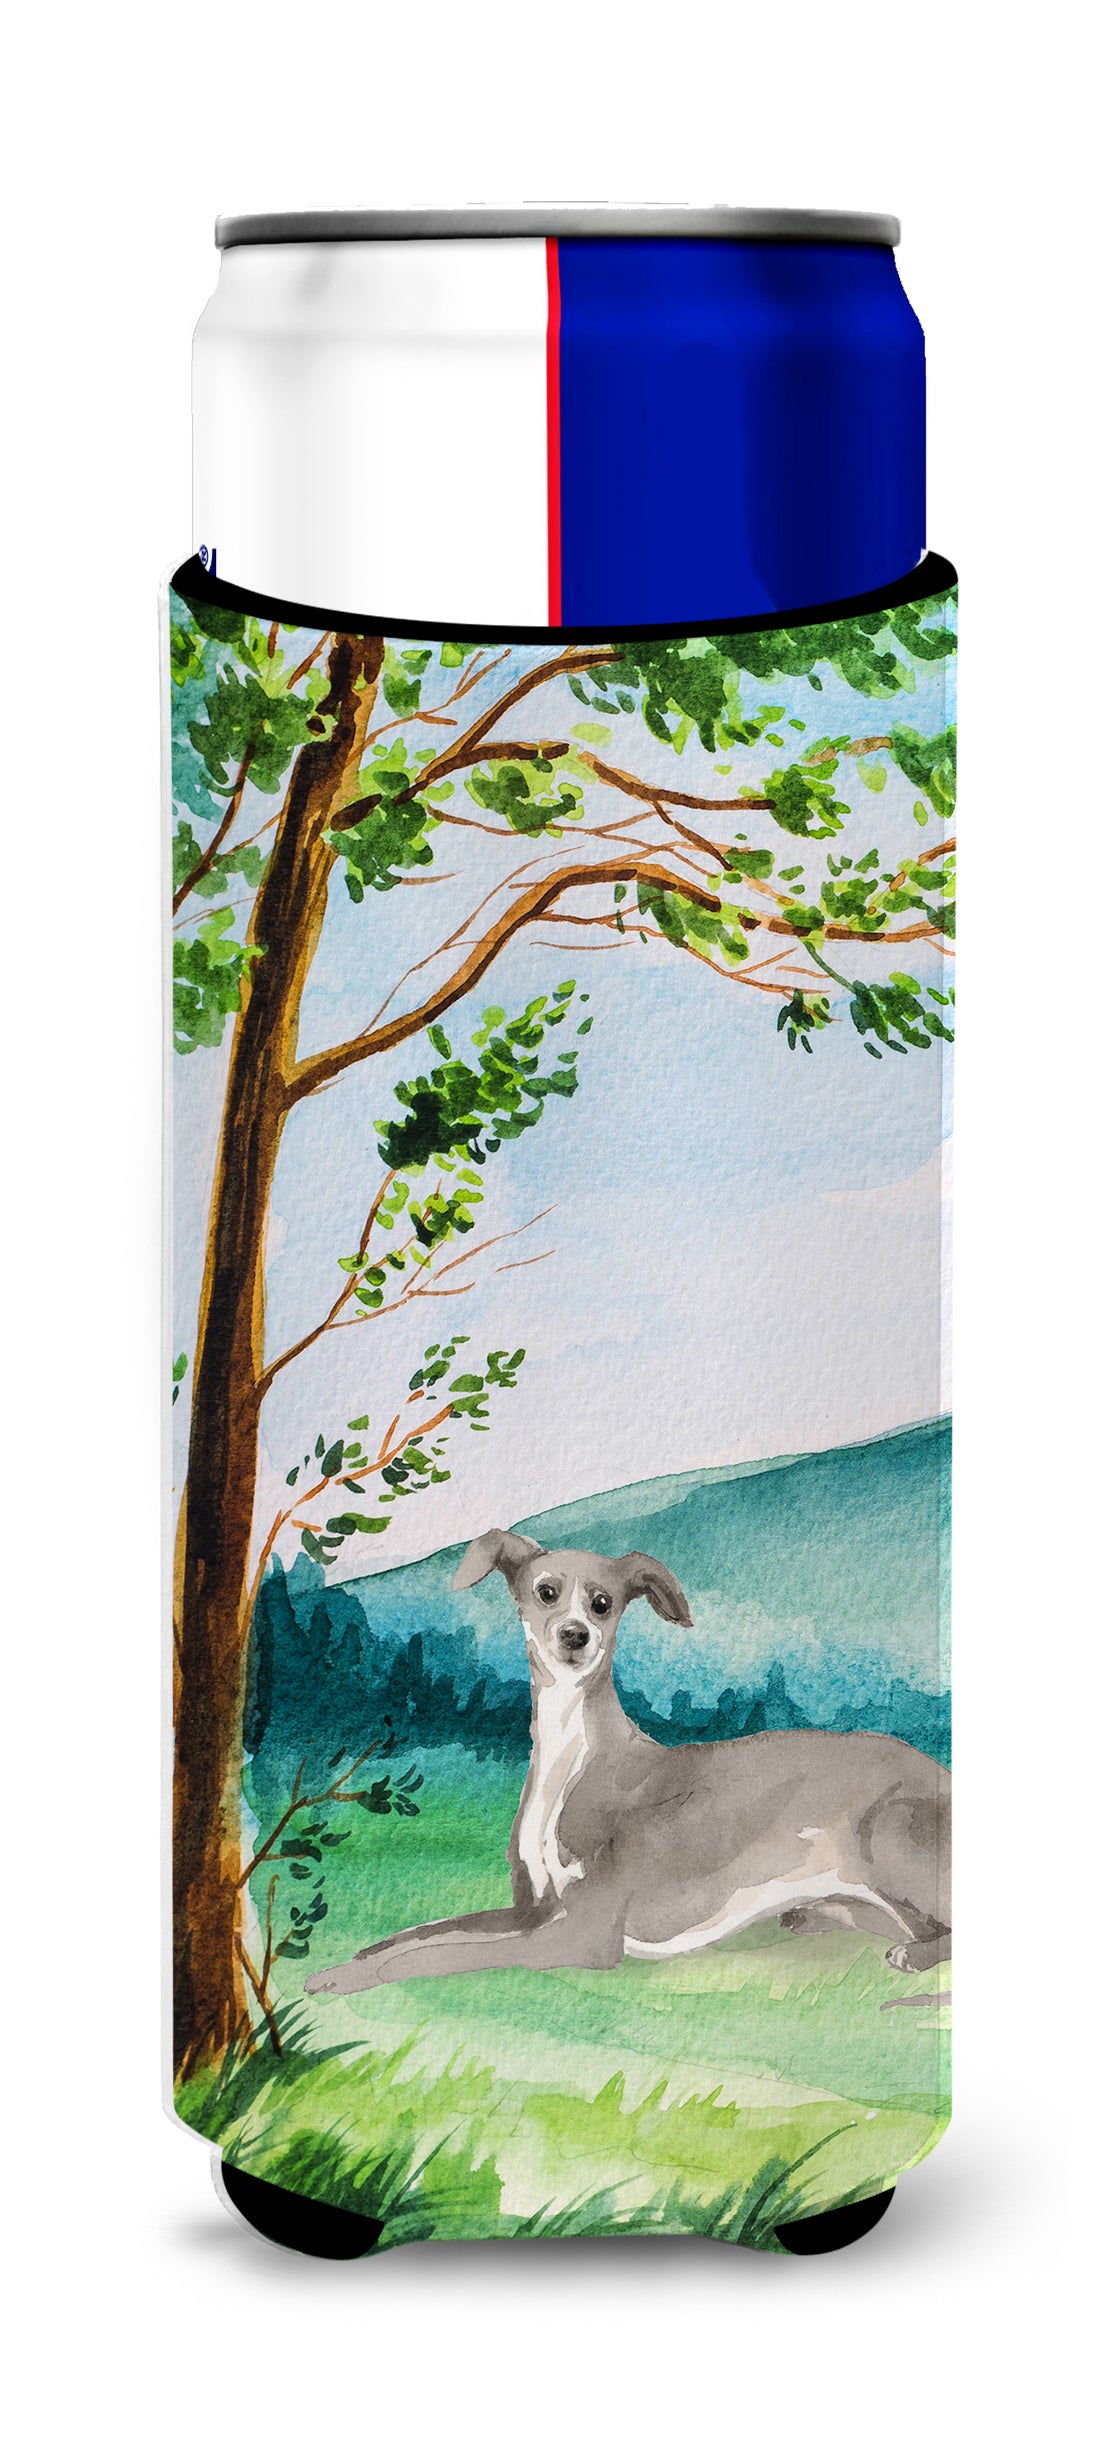 Under the Tree Italian Greyhound  Ultra Hugger for slim cans CK2009MUK